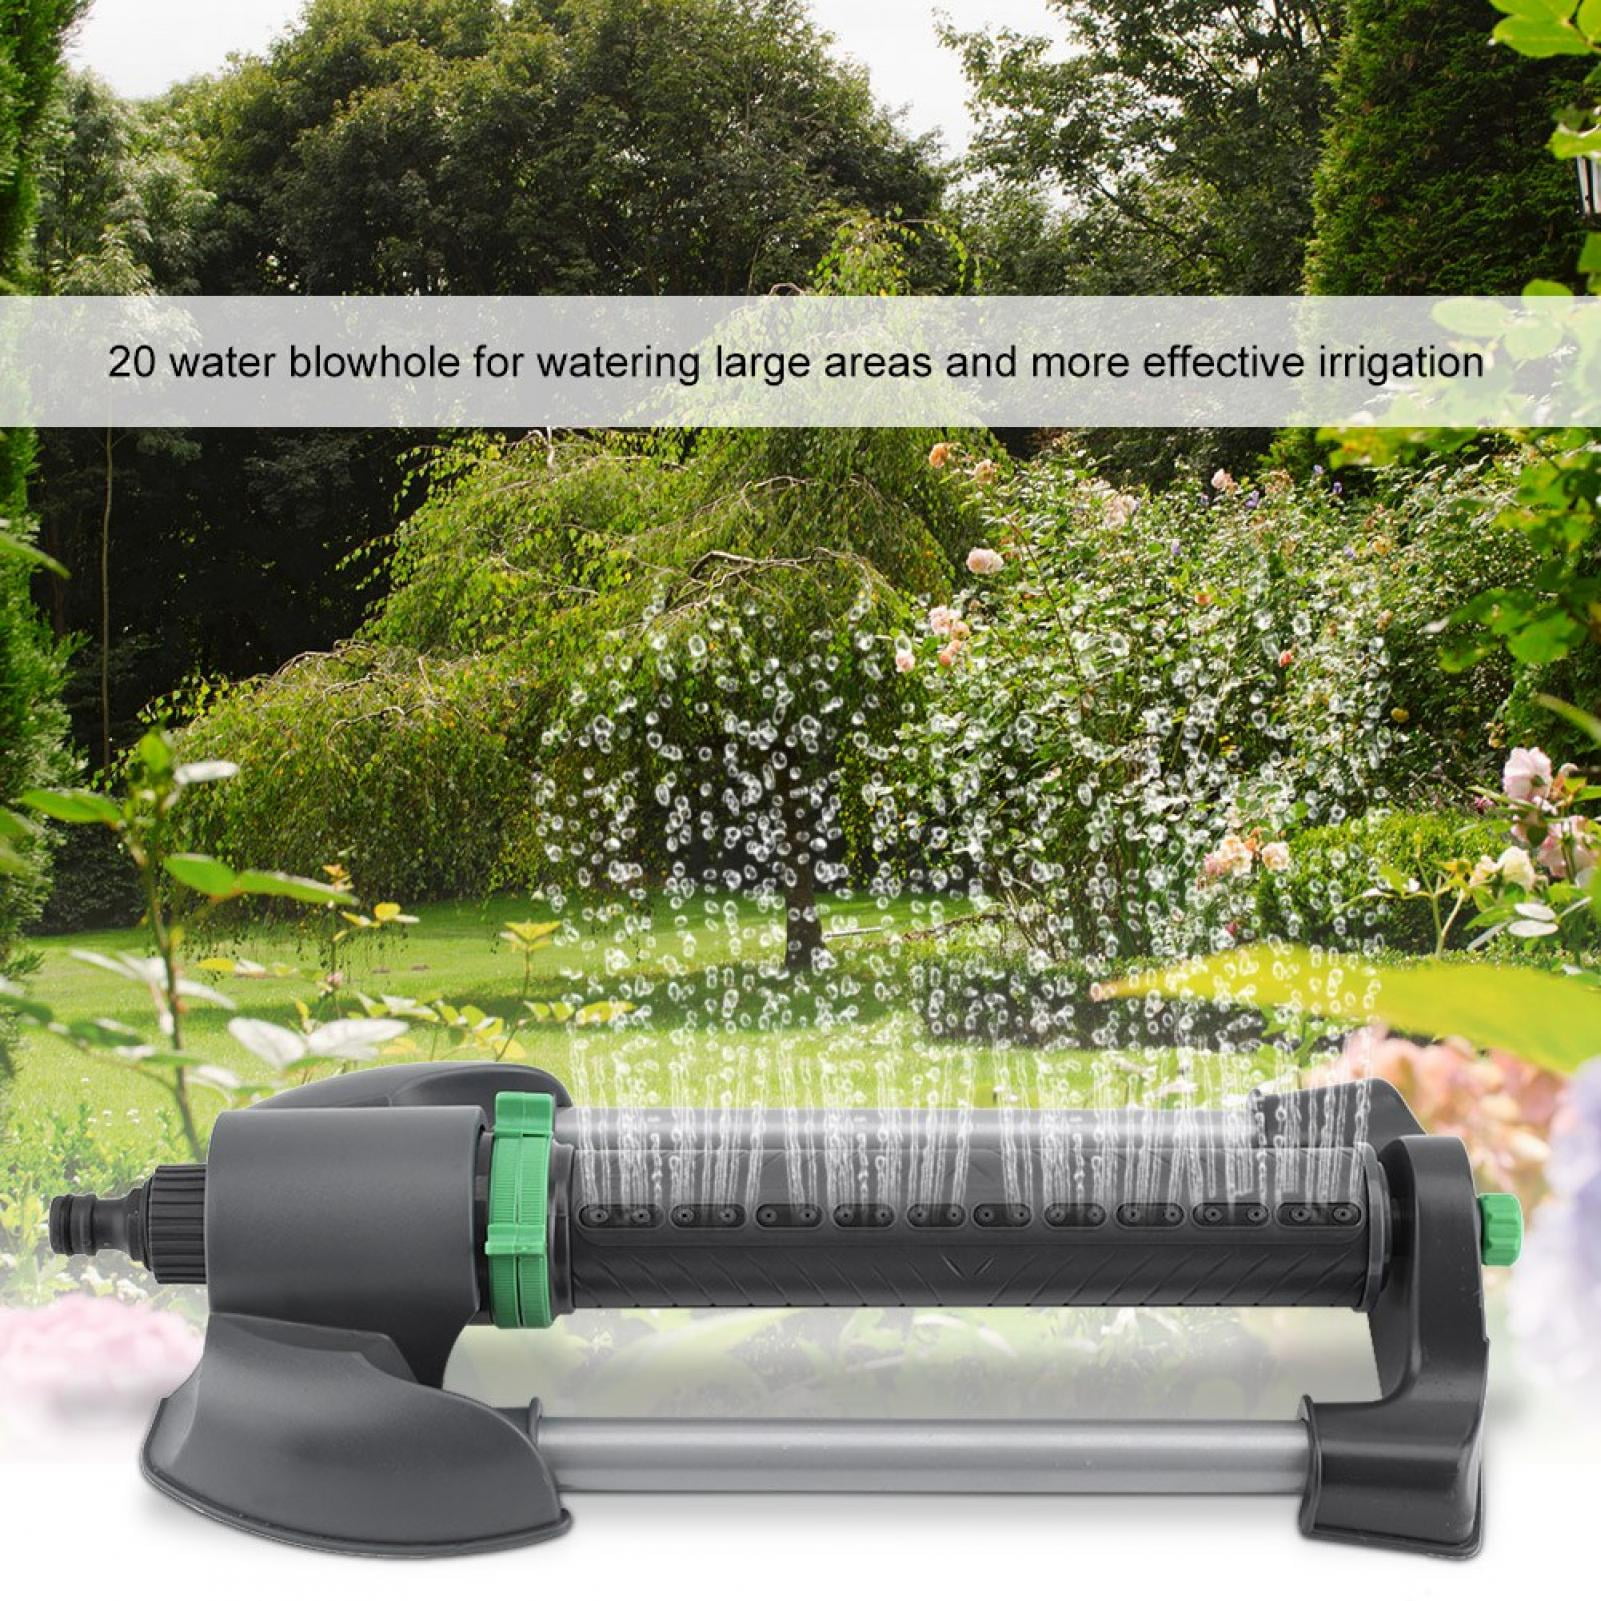 Plant Watering System with 1/4” Blank Distribution Tubing Hose MSDADA 82ft Drip Irrigation Kits Garden Irrigation Accessories Blue 